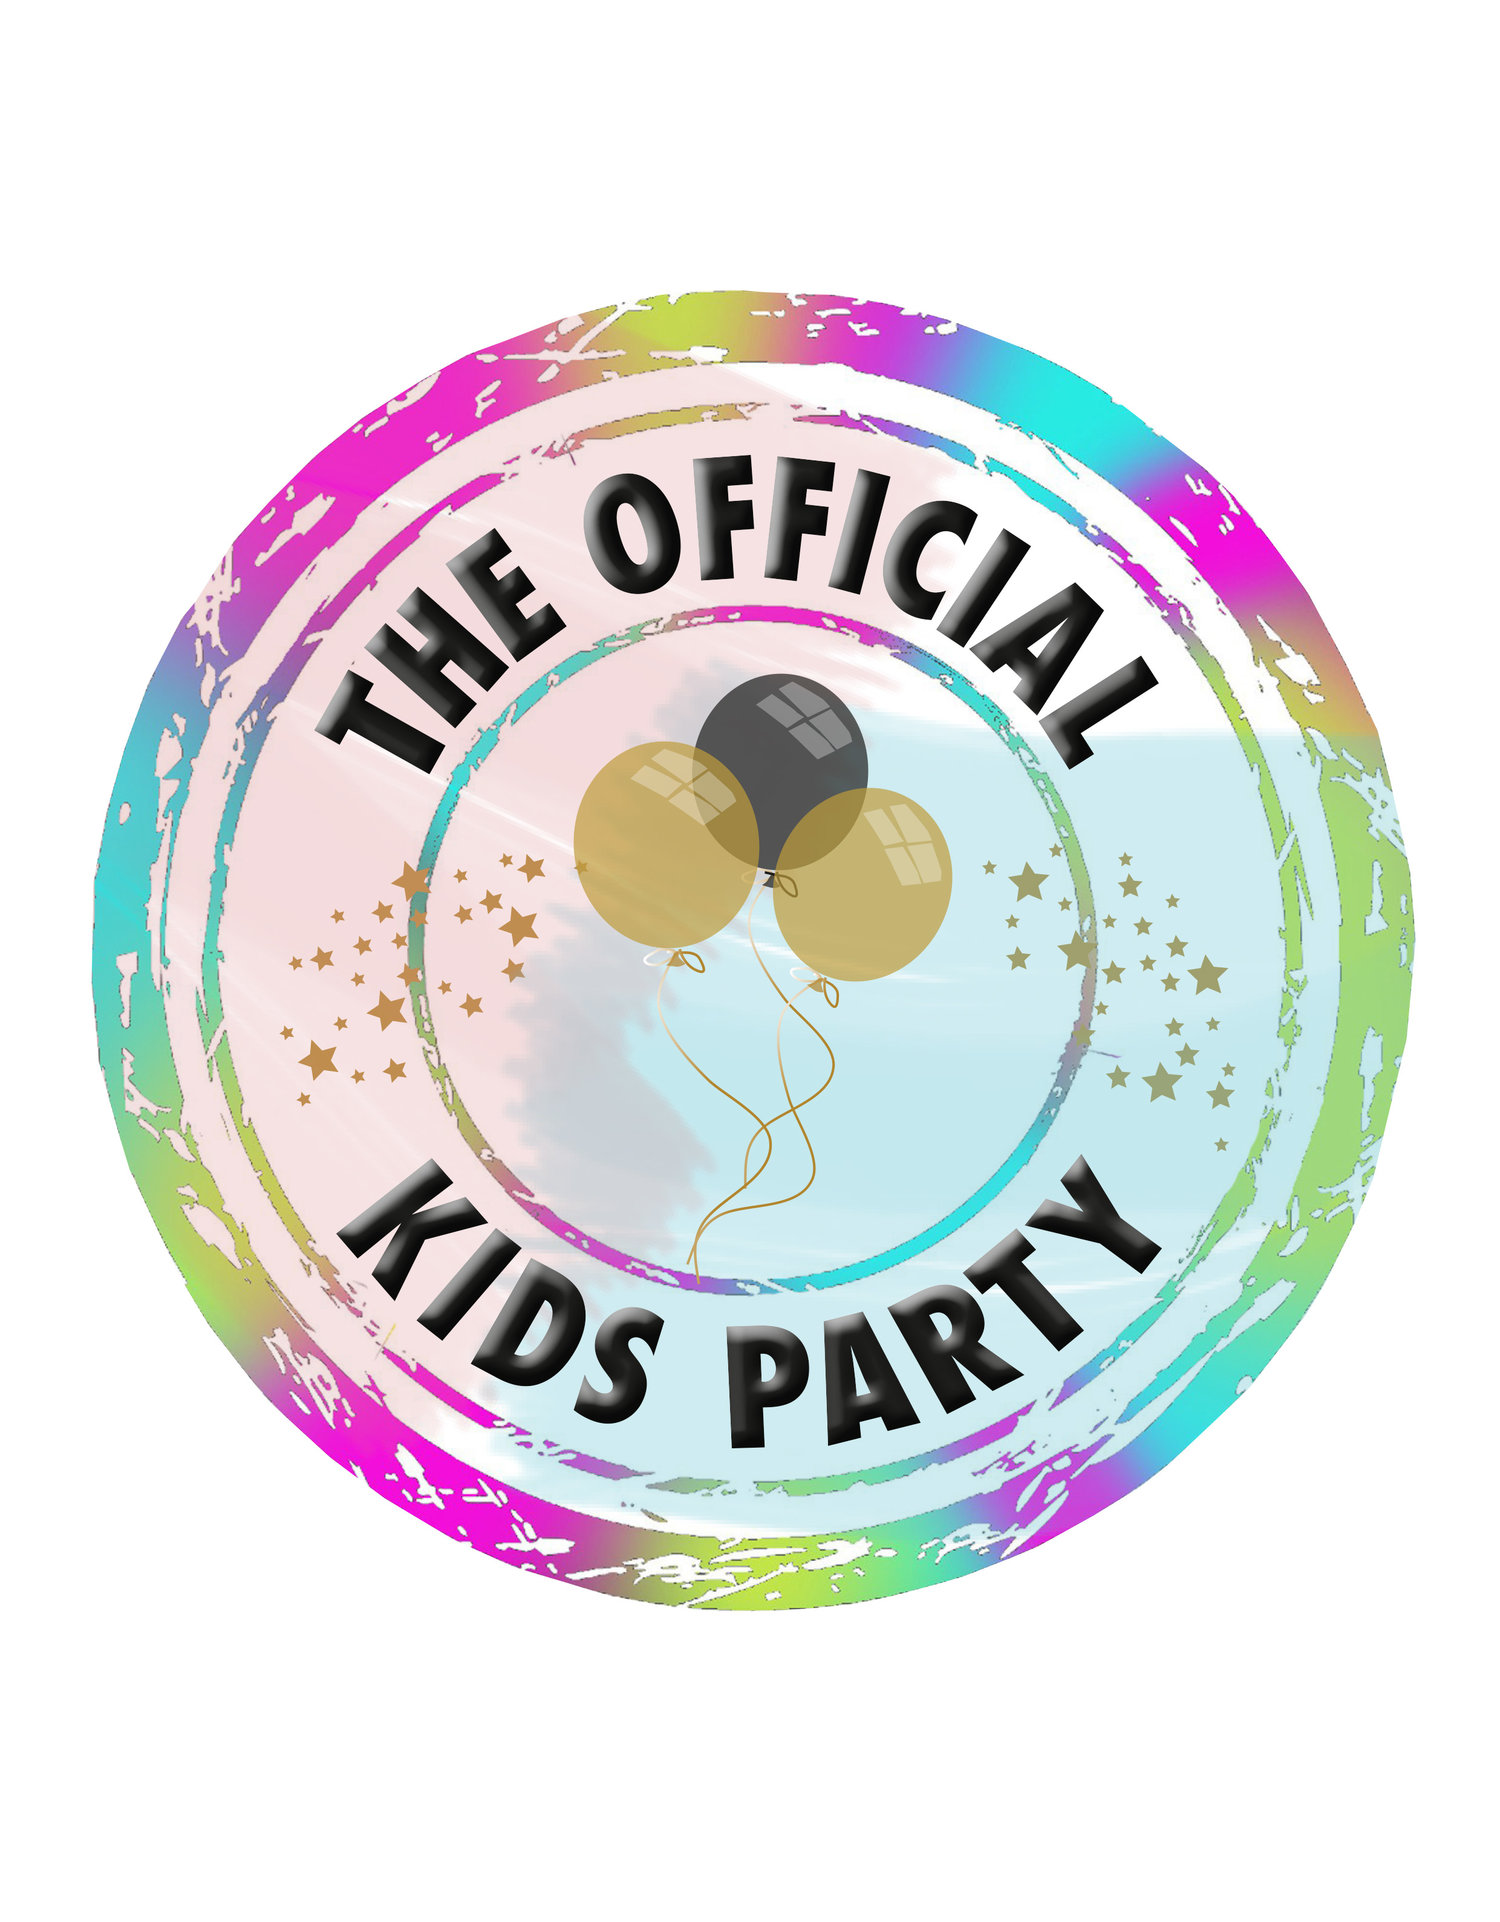 The Official Kids Party